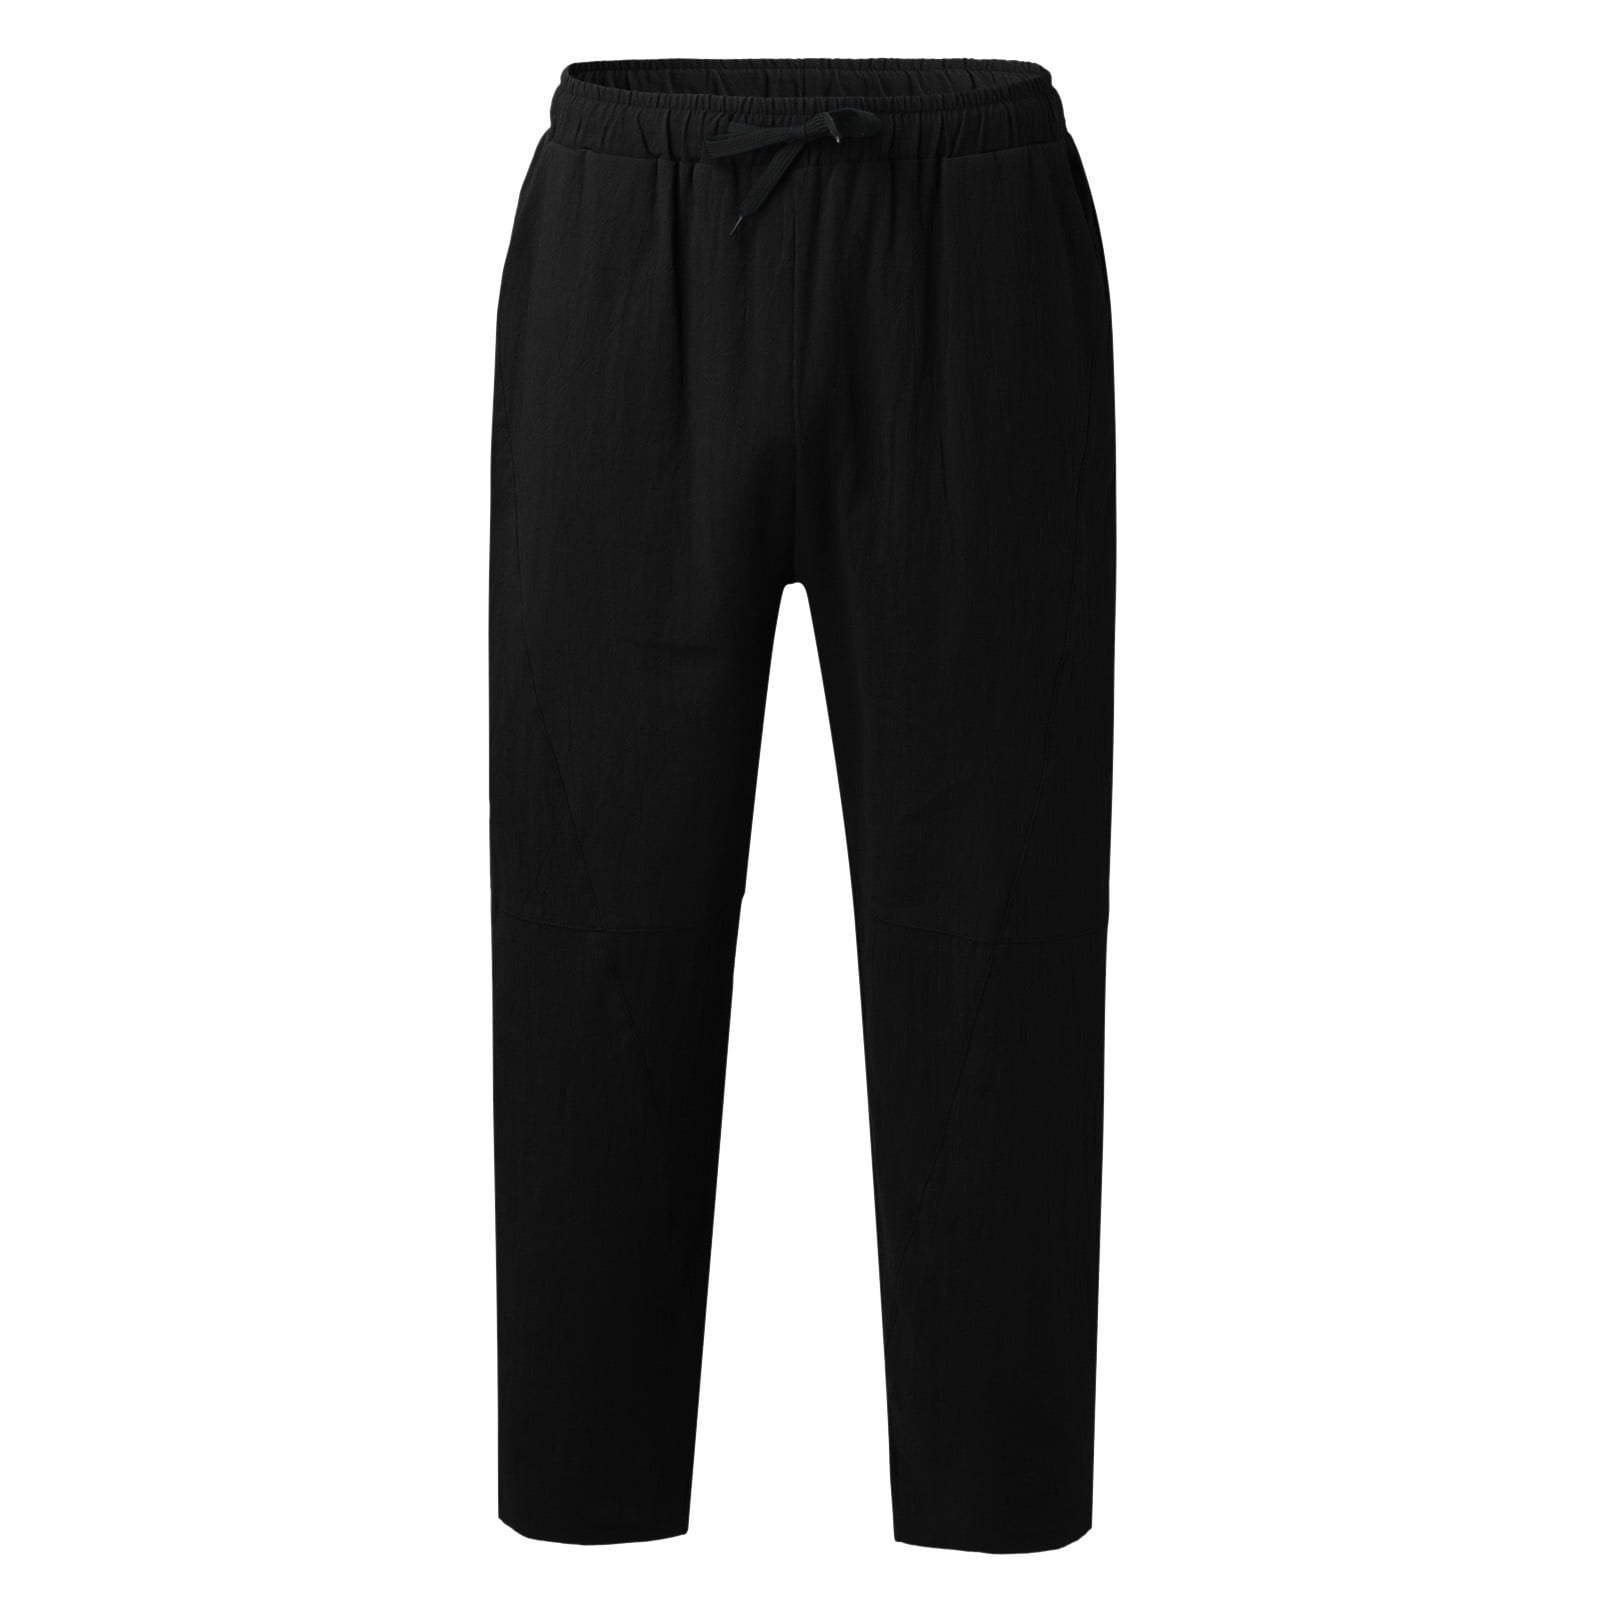 TOWED22 Mens Sweatpants Open Bottom,Sweatpants for Men with Pockets ...